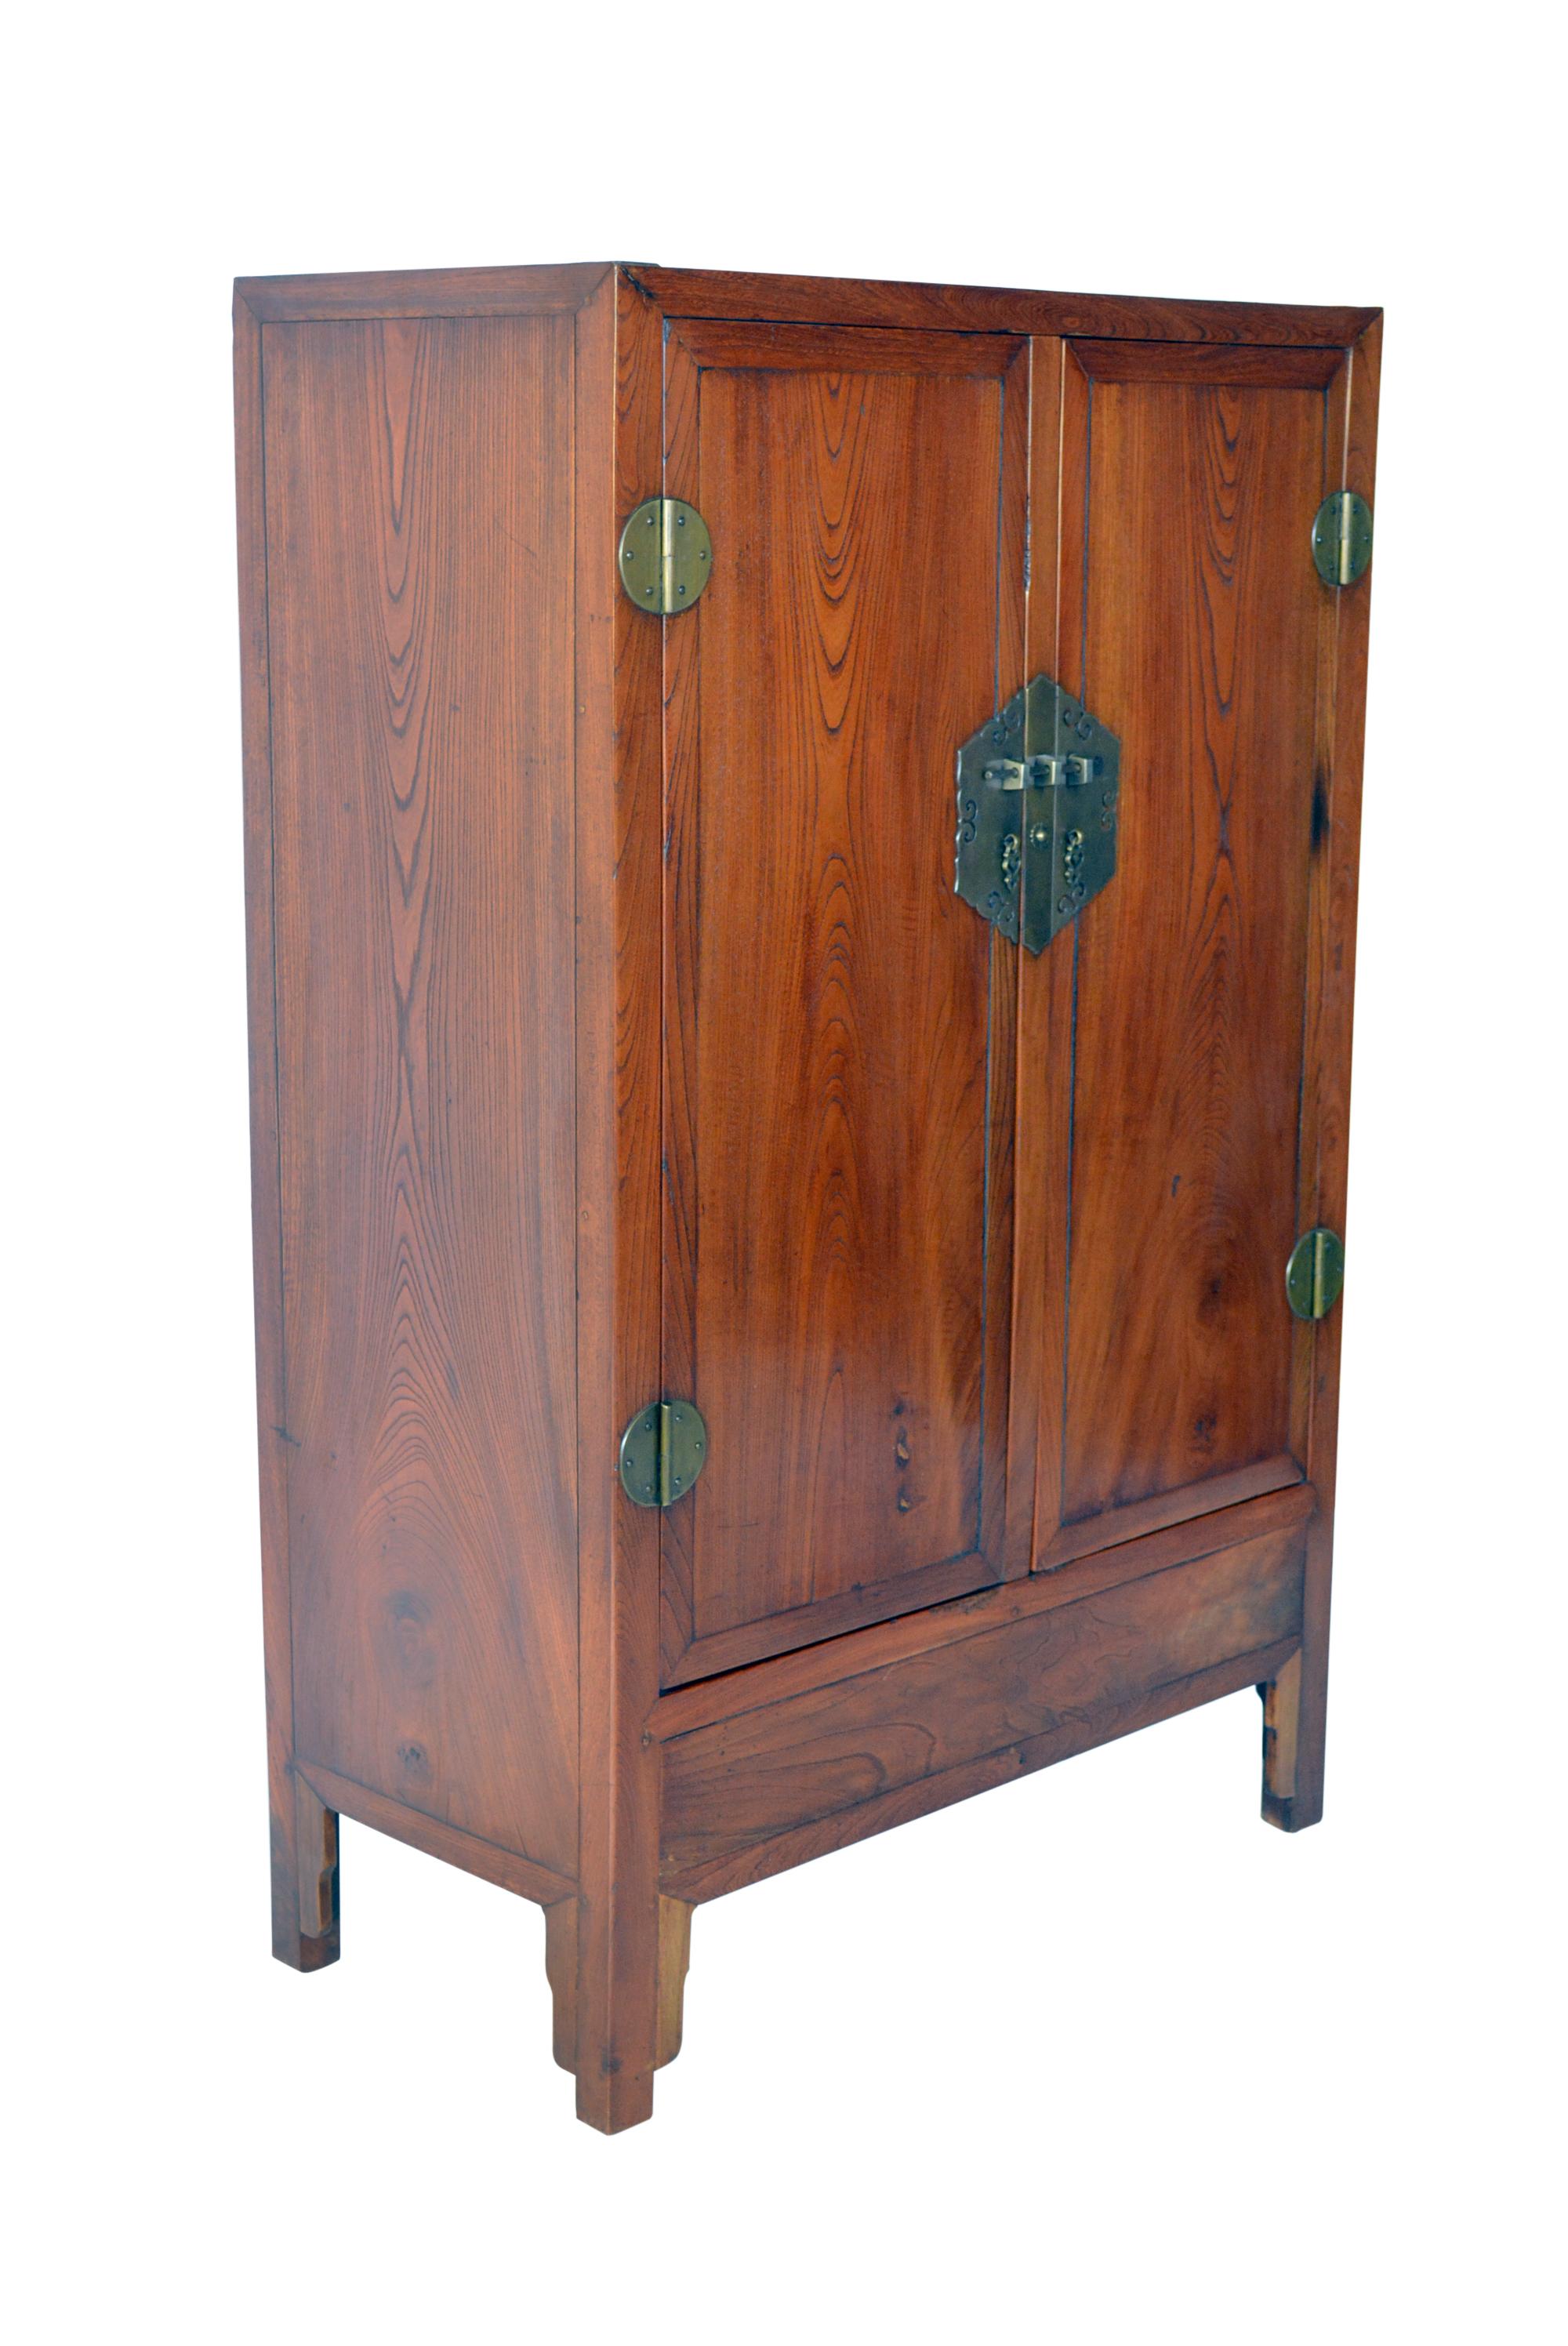 Scholar cabinet 55h x 35w x 17d
This is a square corner cabinet with a central stile between the doors. The hardware is decorative. The cabinet has a standard mitered mortised and tenoned frame with floating panels. The surface of the frame members